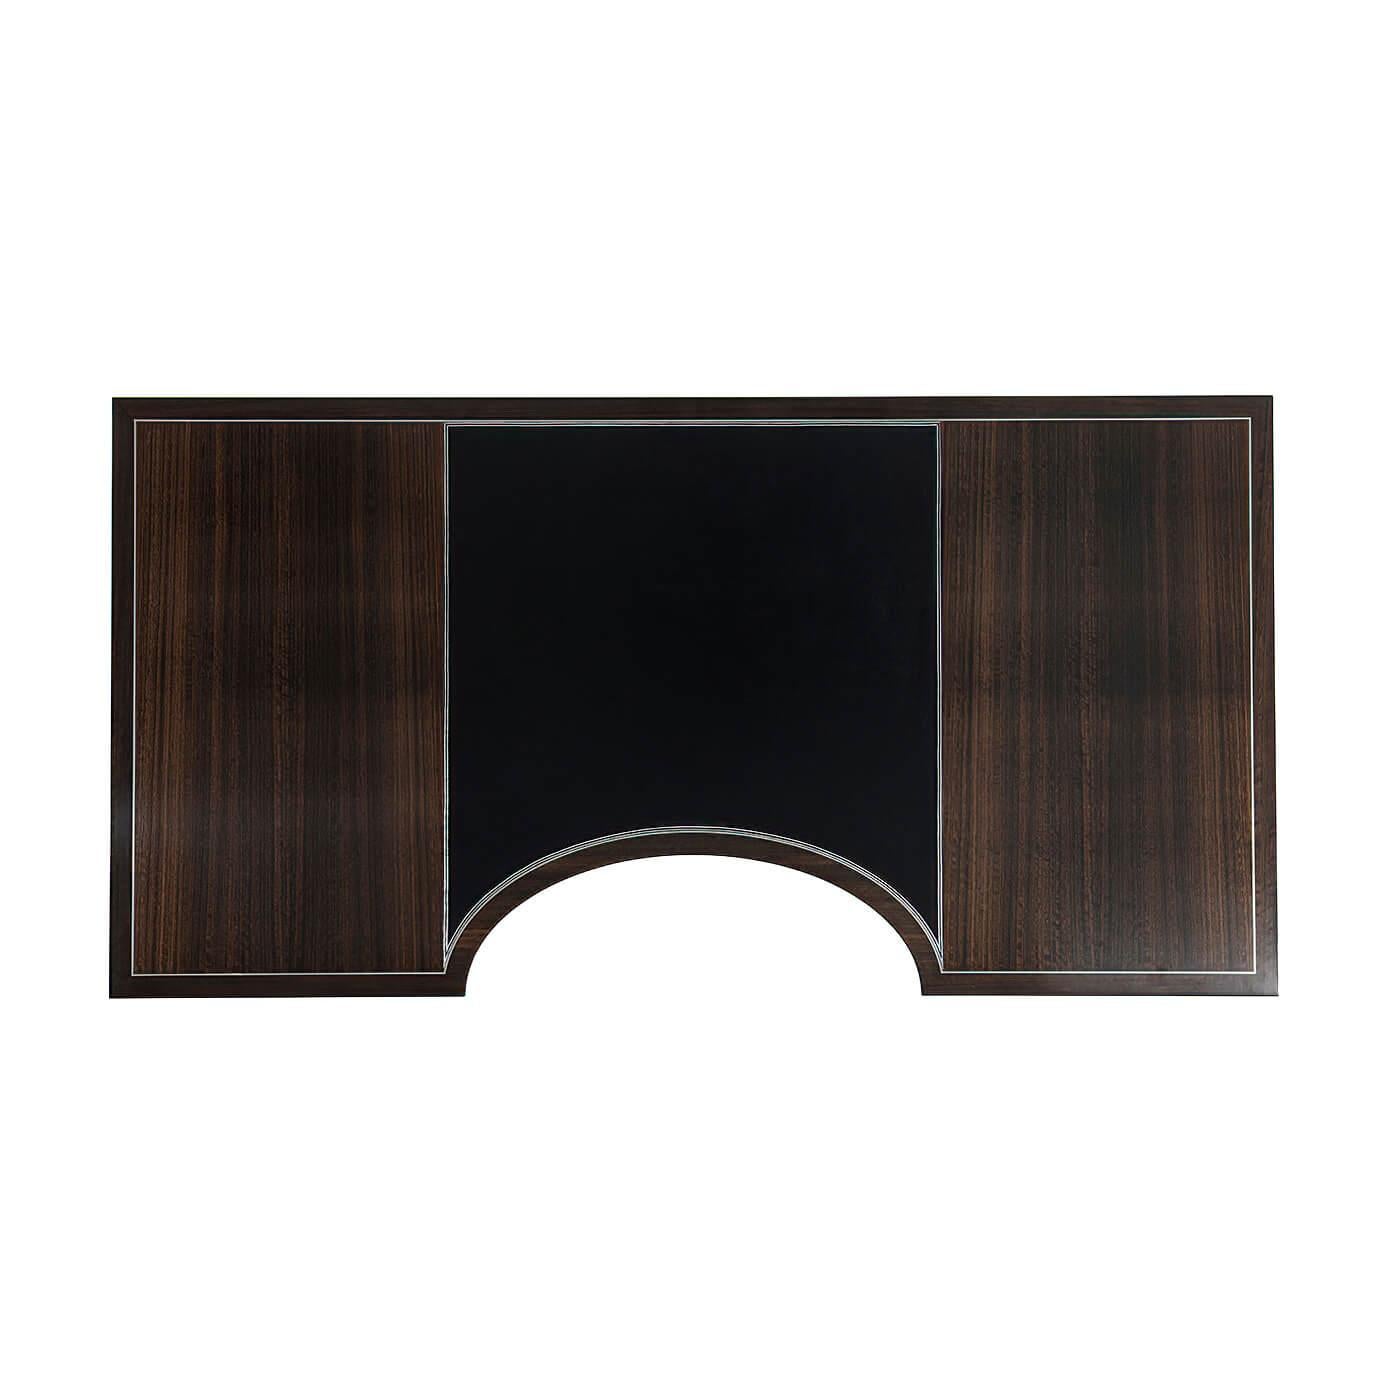 A French Art Deco style fumed figured Eucalyptus veneered desk, the rectangular stainless steel strung top centered by a tooled leather writing surface and a demi lune cut-out, with three frieze drawers with stainless steel handles, on turned legs